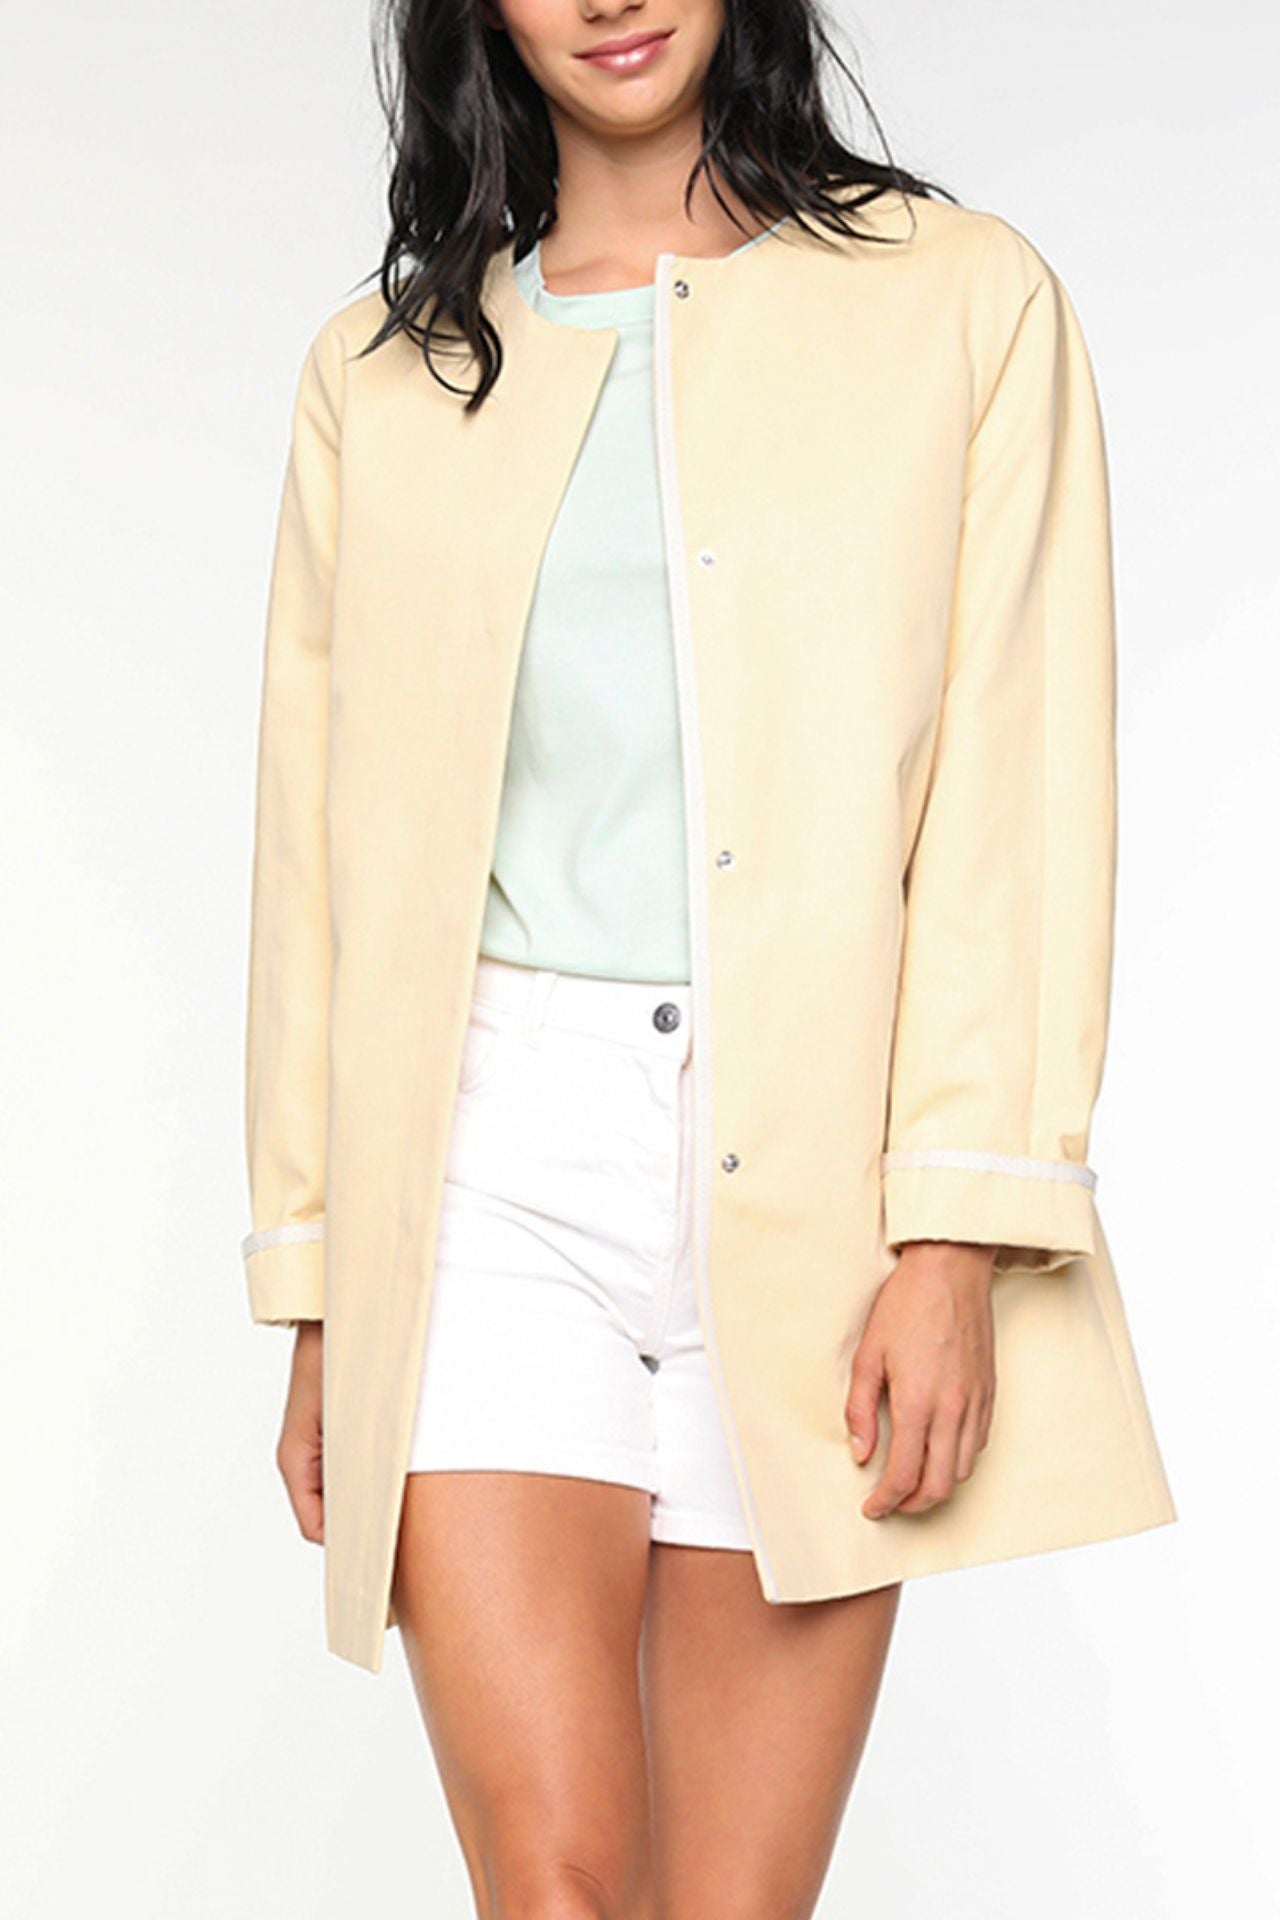 LANGEAIS-Collarless coat in pale yellow cotton and linen